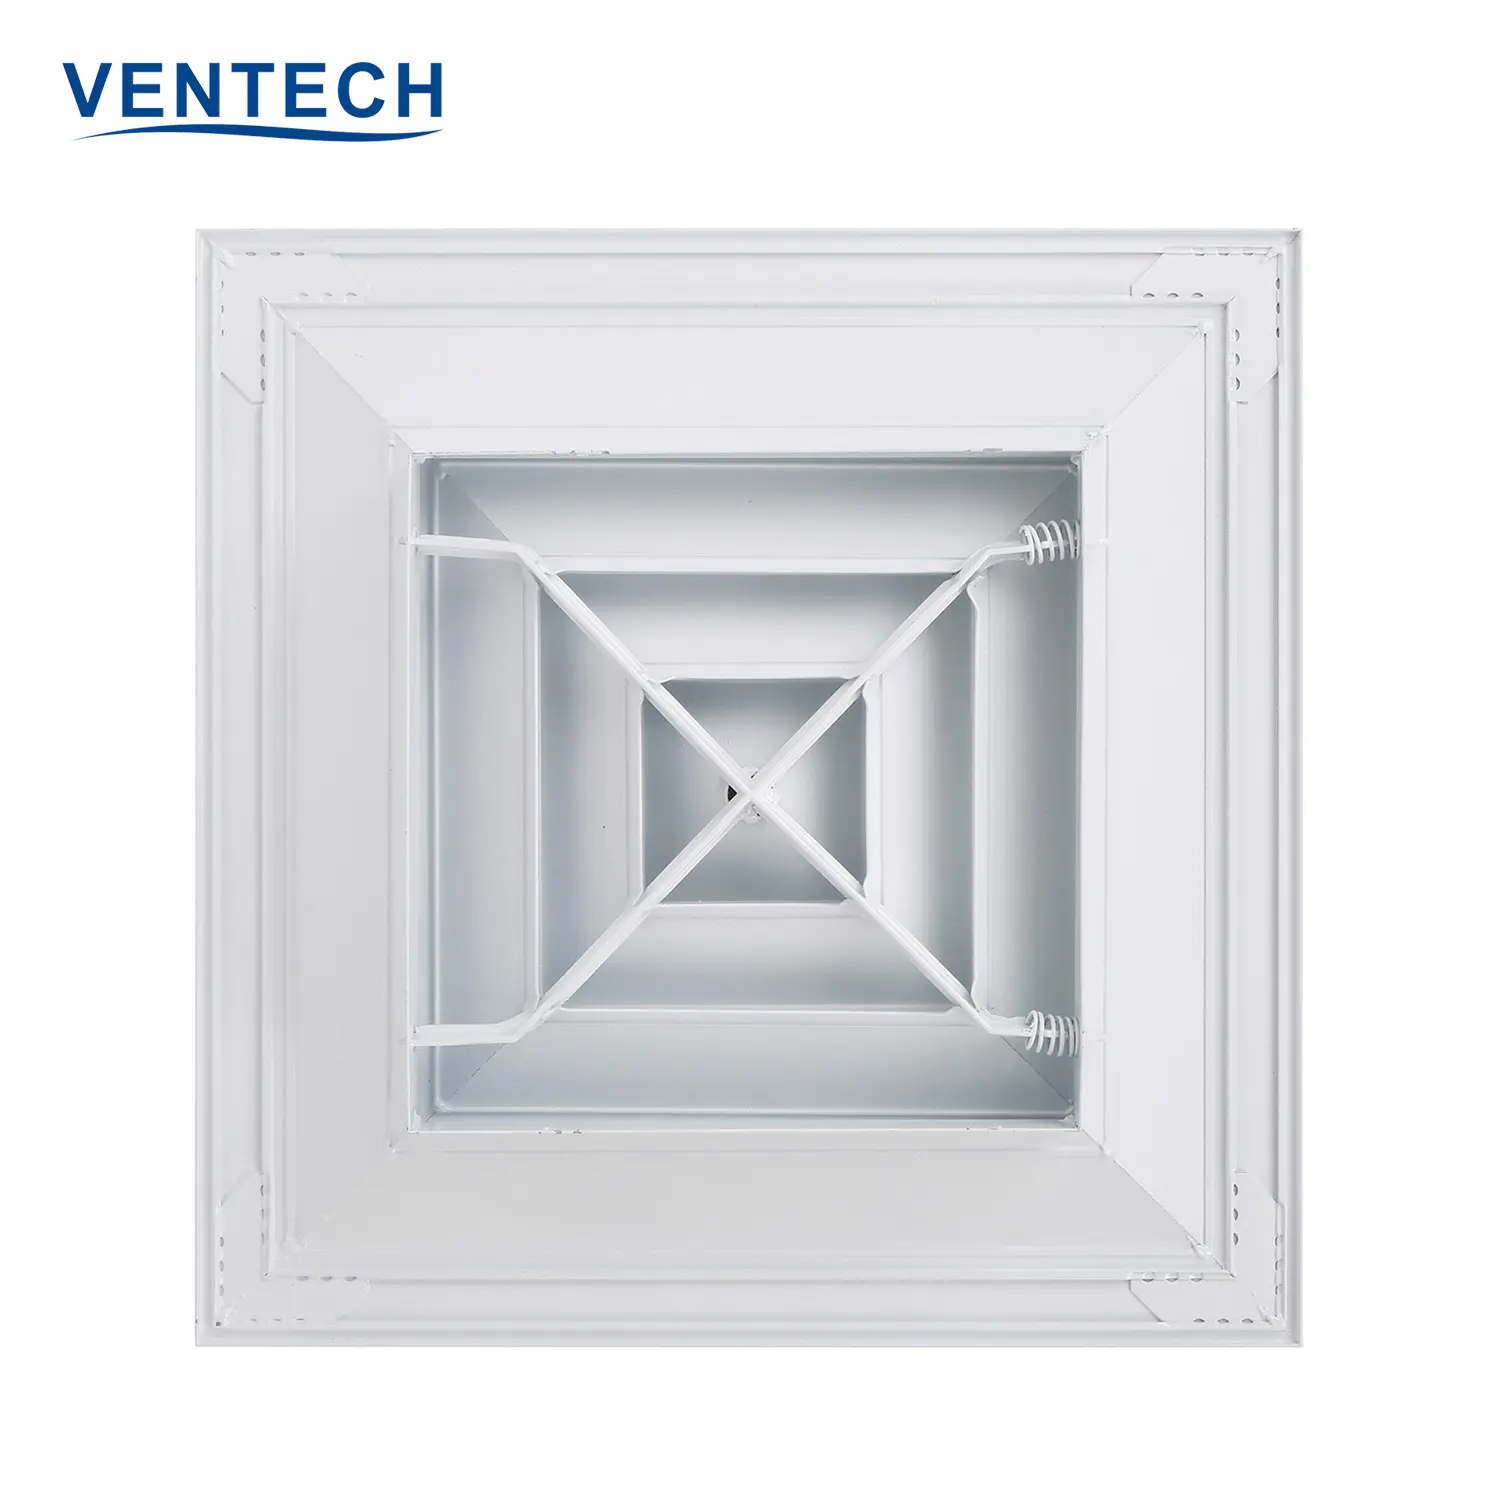 Hvac VENTECH Exhaust Aluminum Alloy Air Conditioning Square Ceiling Air Duct Outlet Diffuser